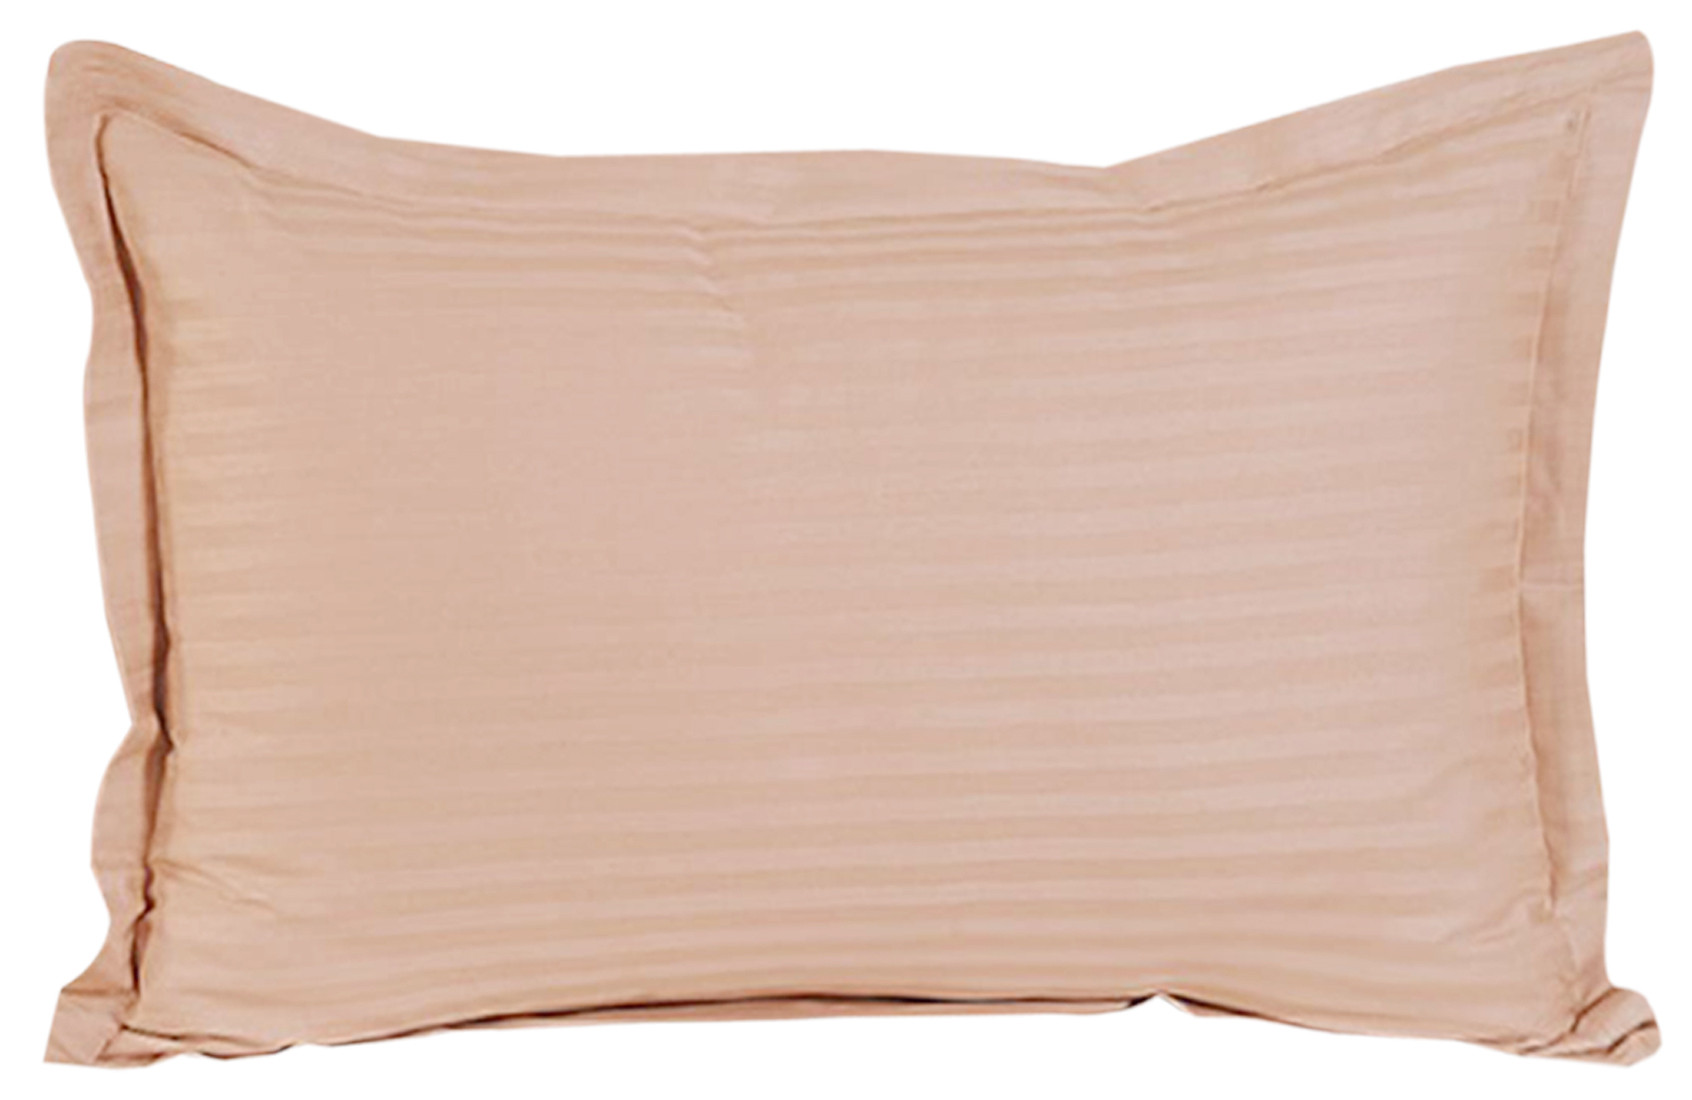 Kuber Industries Lining Design Breathable & Soft Cotton Pillow Cover/Protector/Case- 18x28 Inch,(Peach)-HS43KUBMART26767